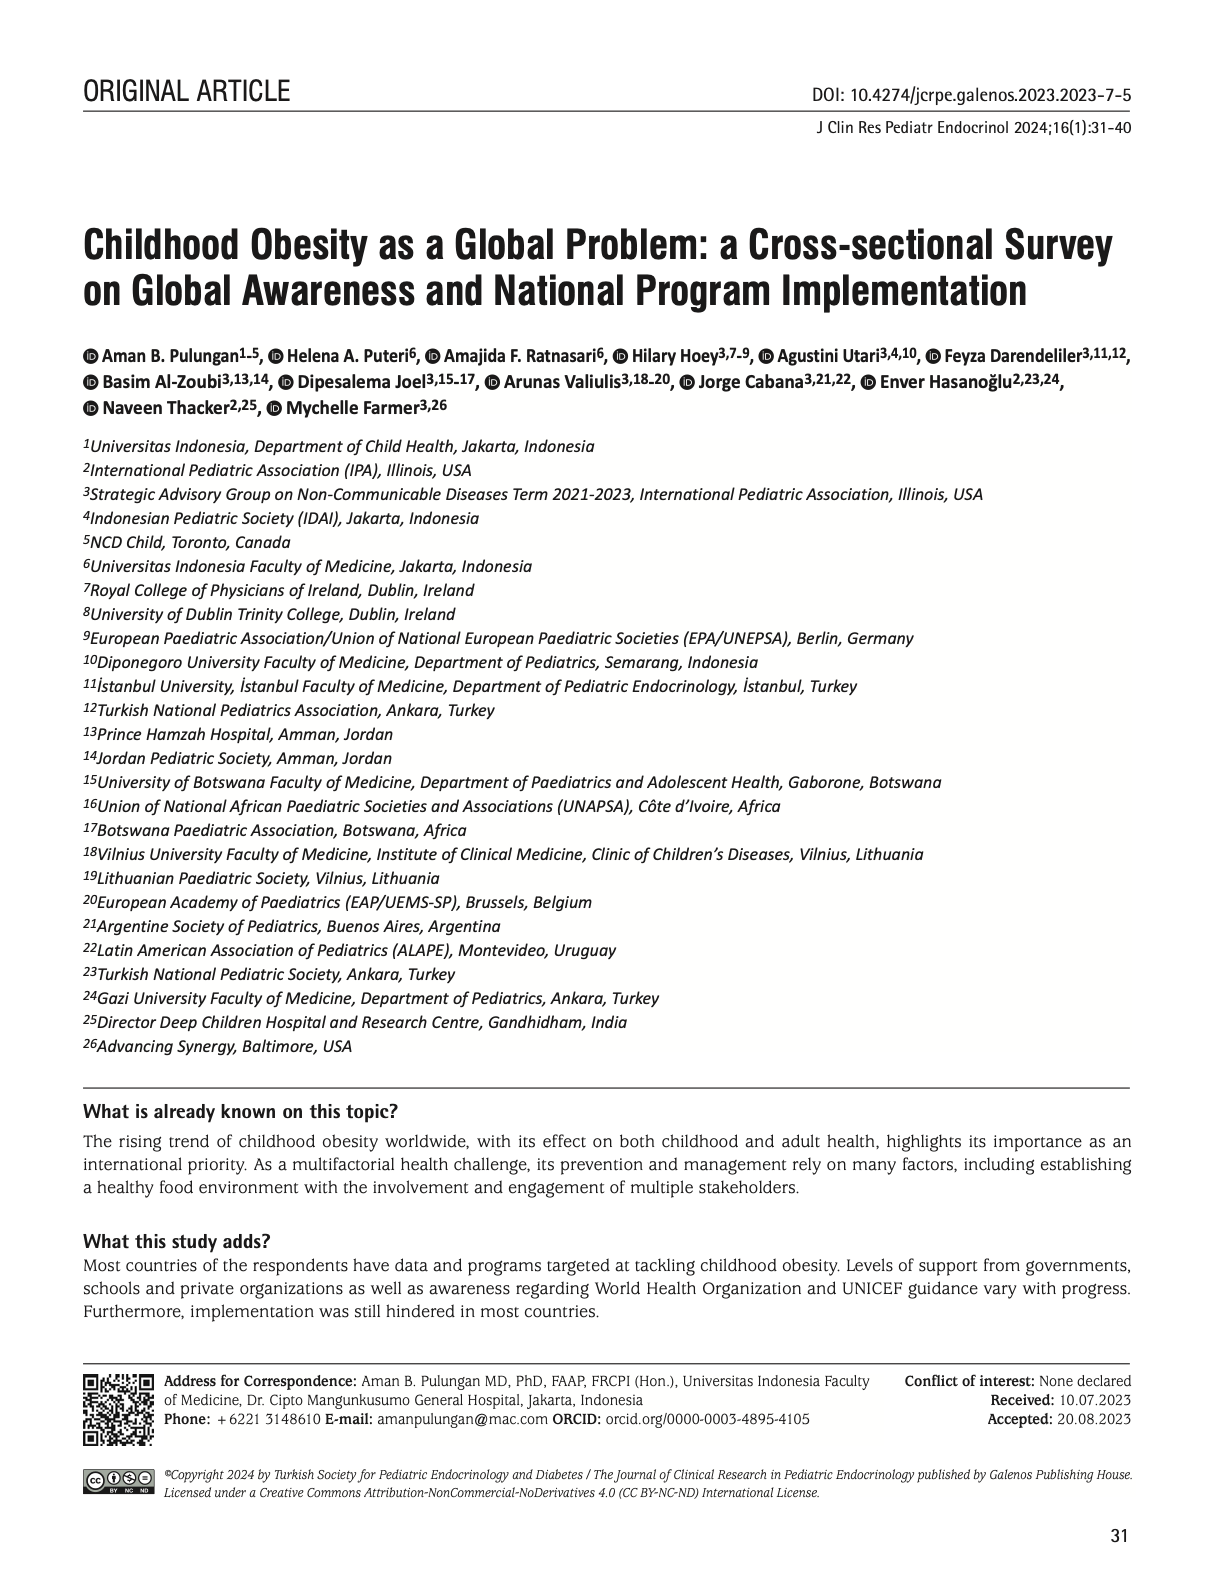 Childhood Obesity as a Global Problem: a Cross-sectional Survey on Global Awareness and National Program Implementation